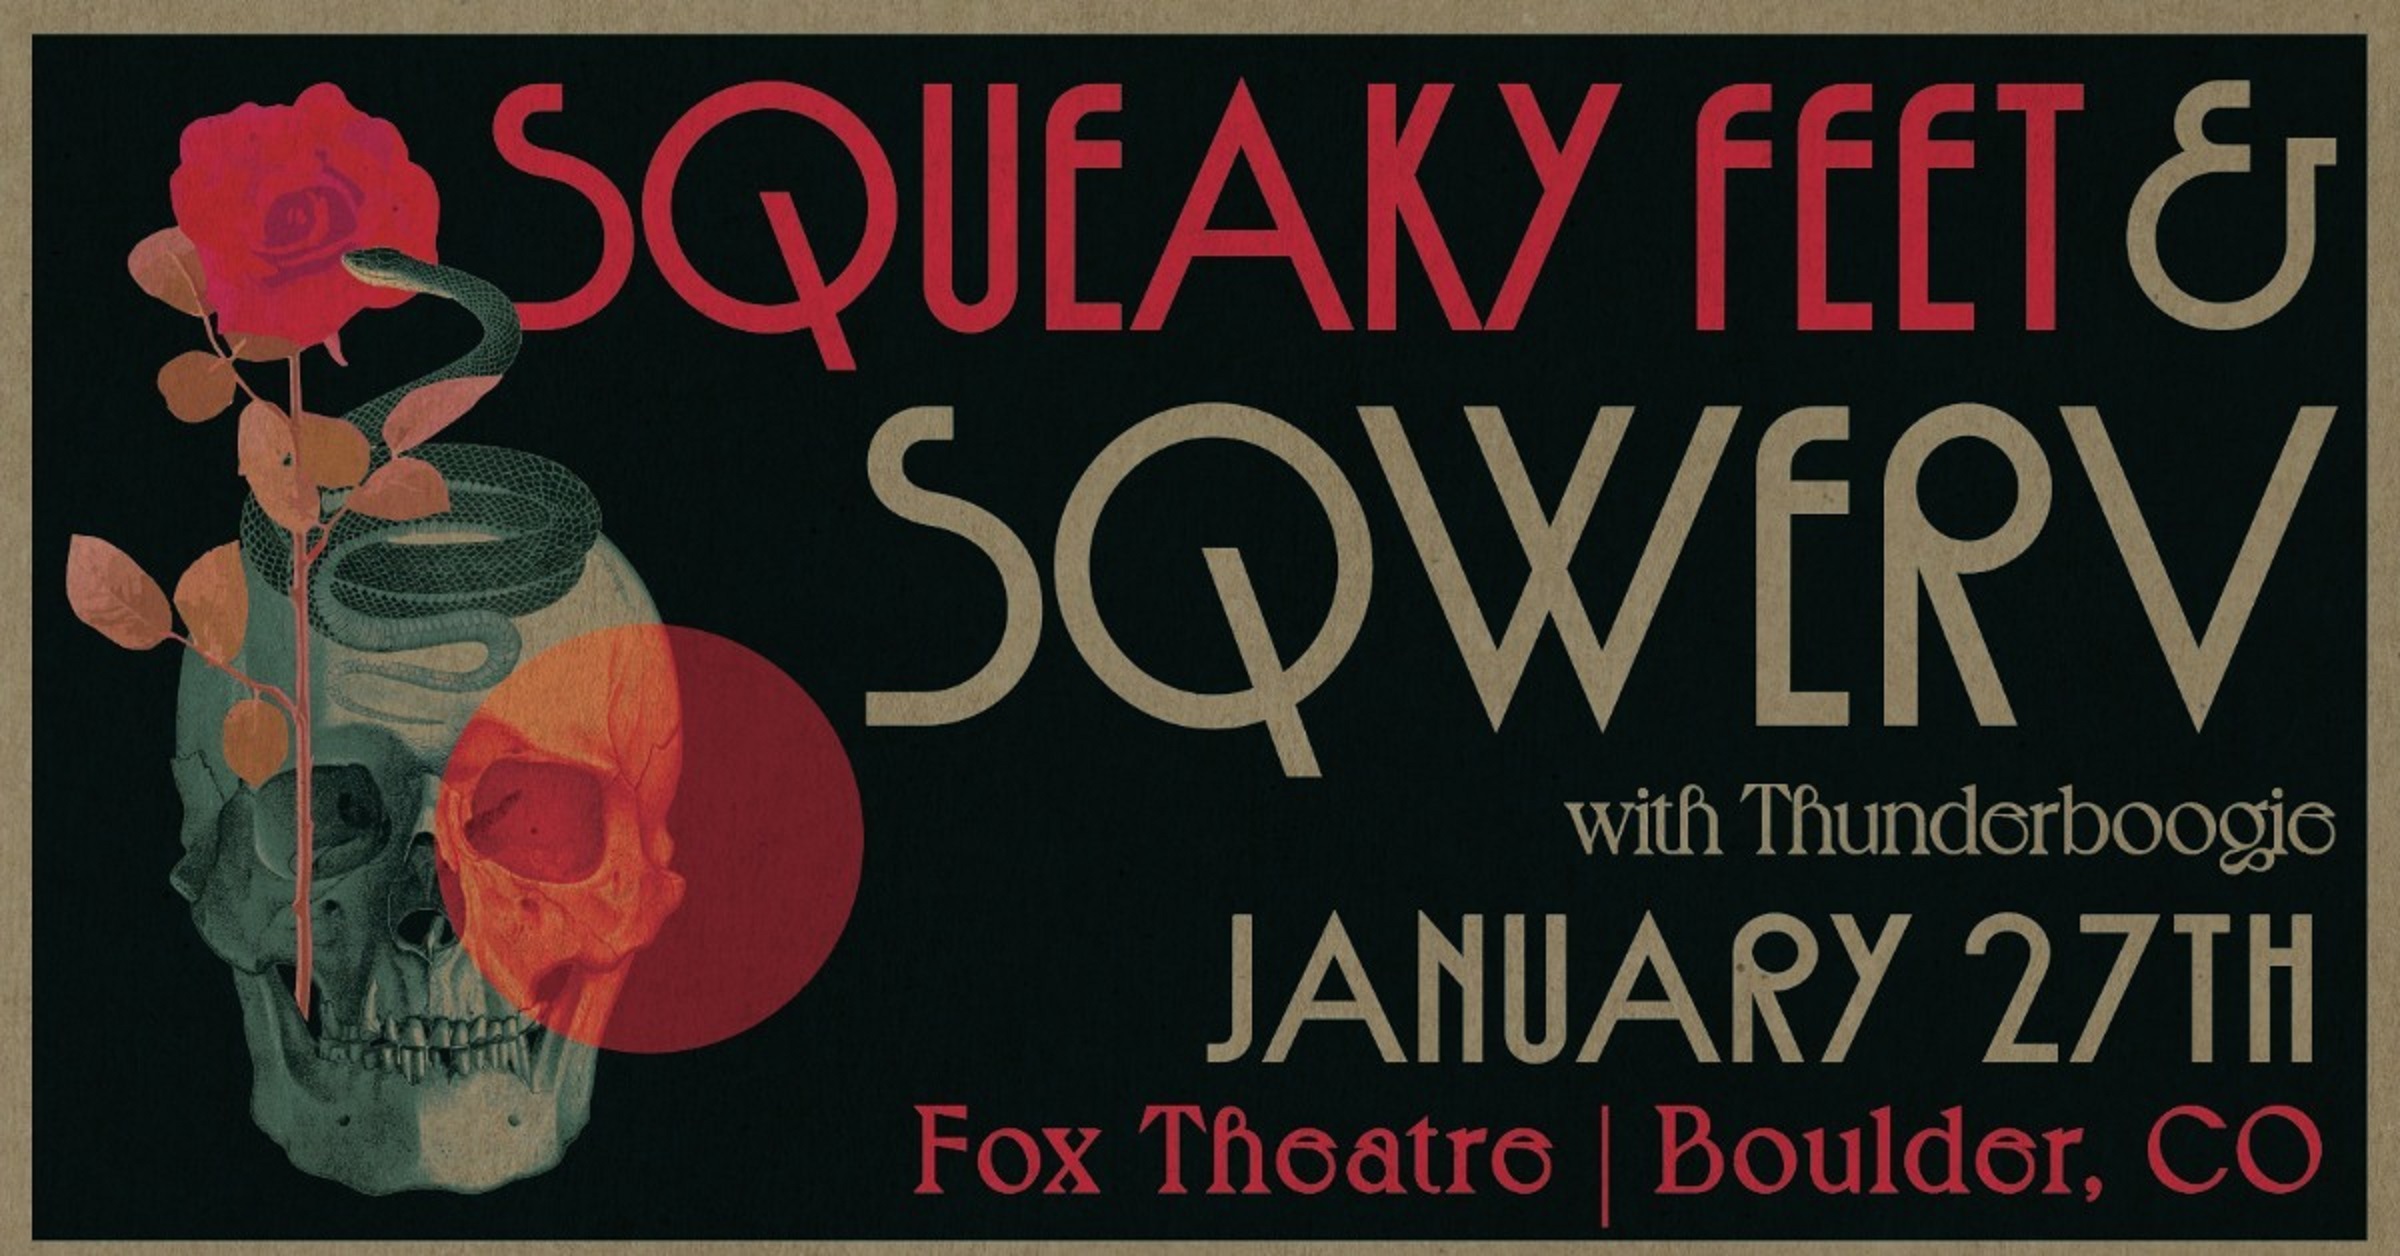 Experience the Electrifying Fusion of Squeaky Feet & Sqwerv with Special Guests Thunderboogie at Boulder's Fox Theatre